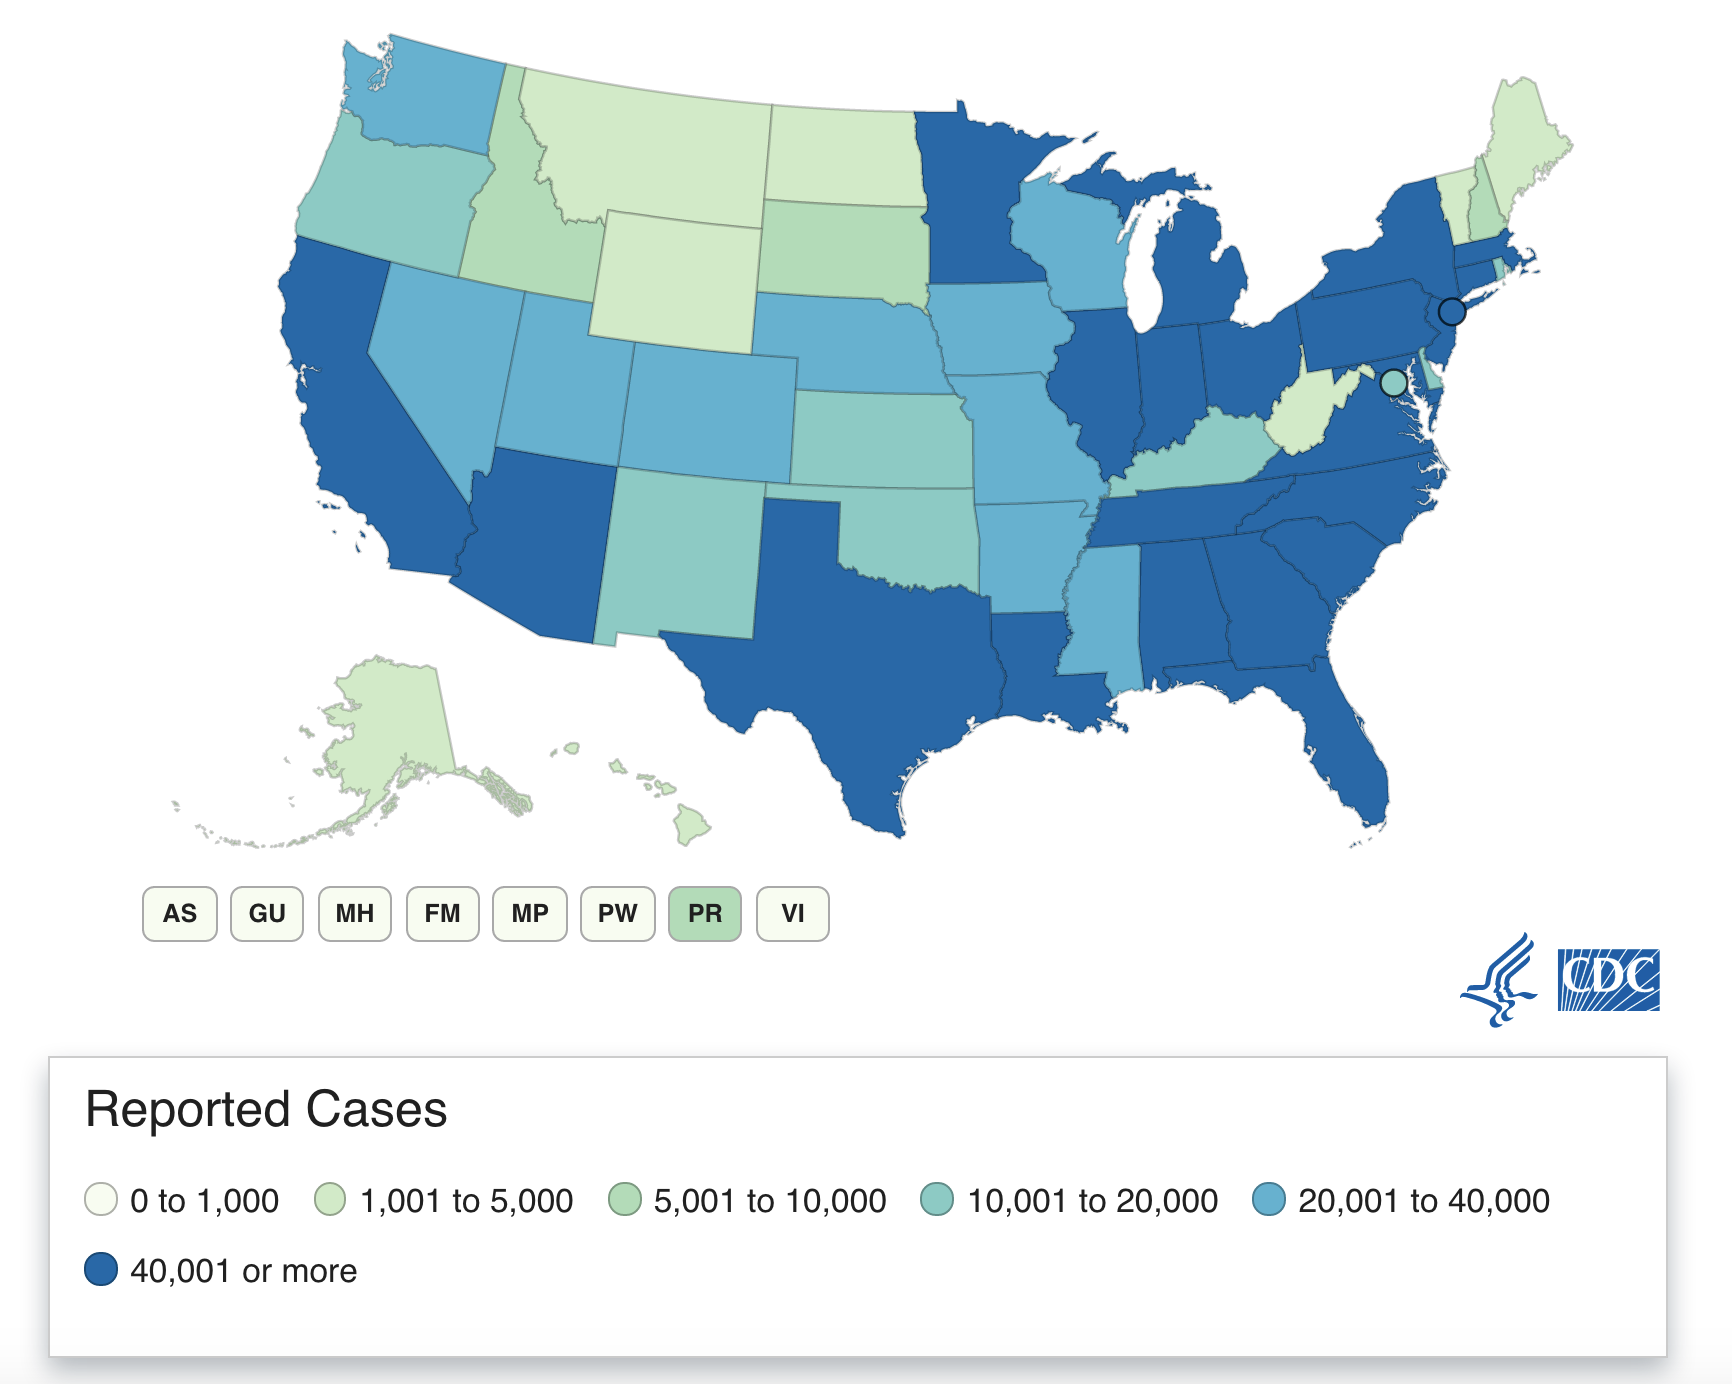 COVID-19 cases in the United States